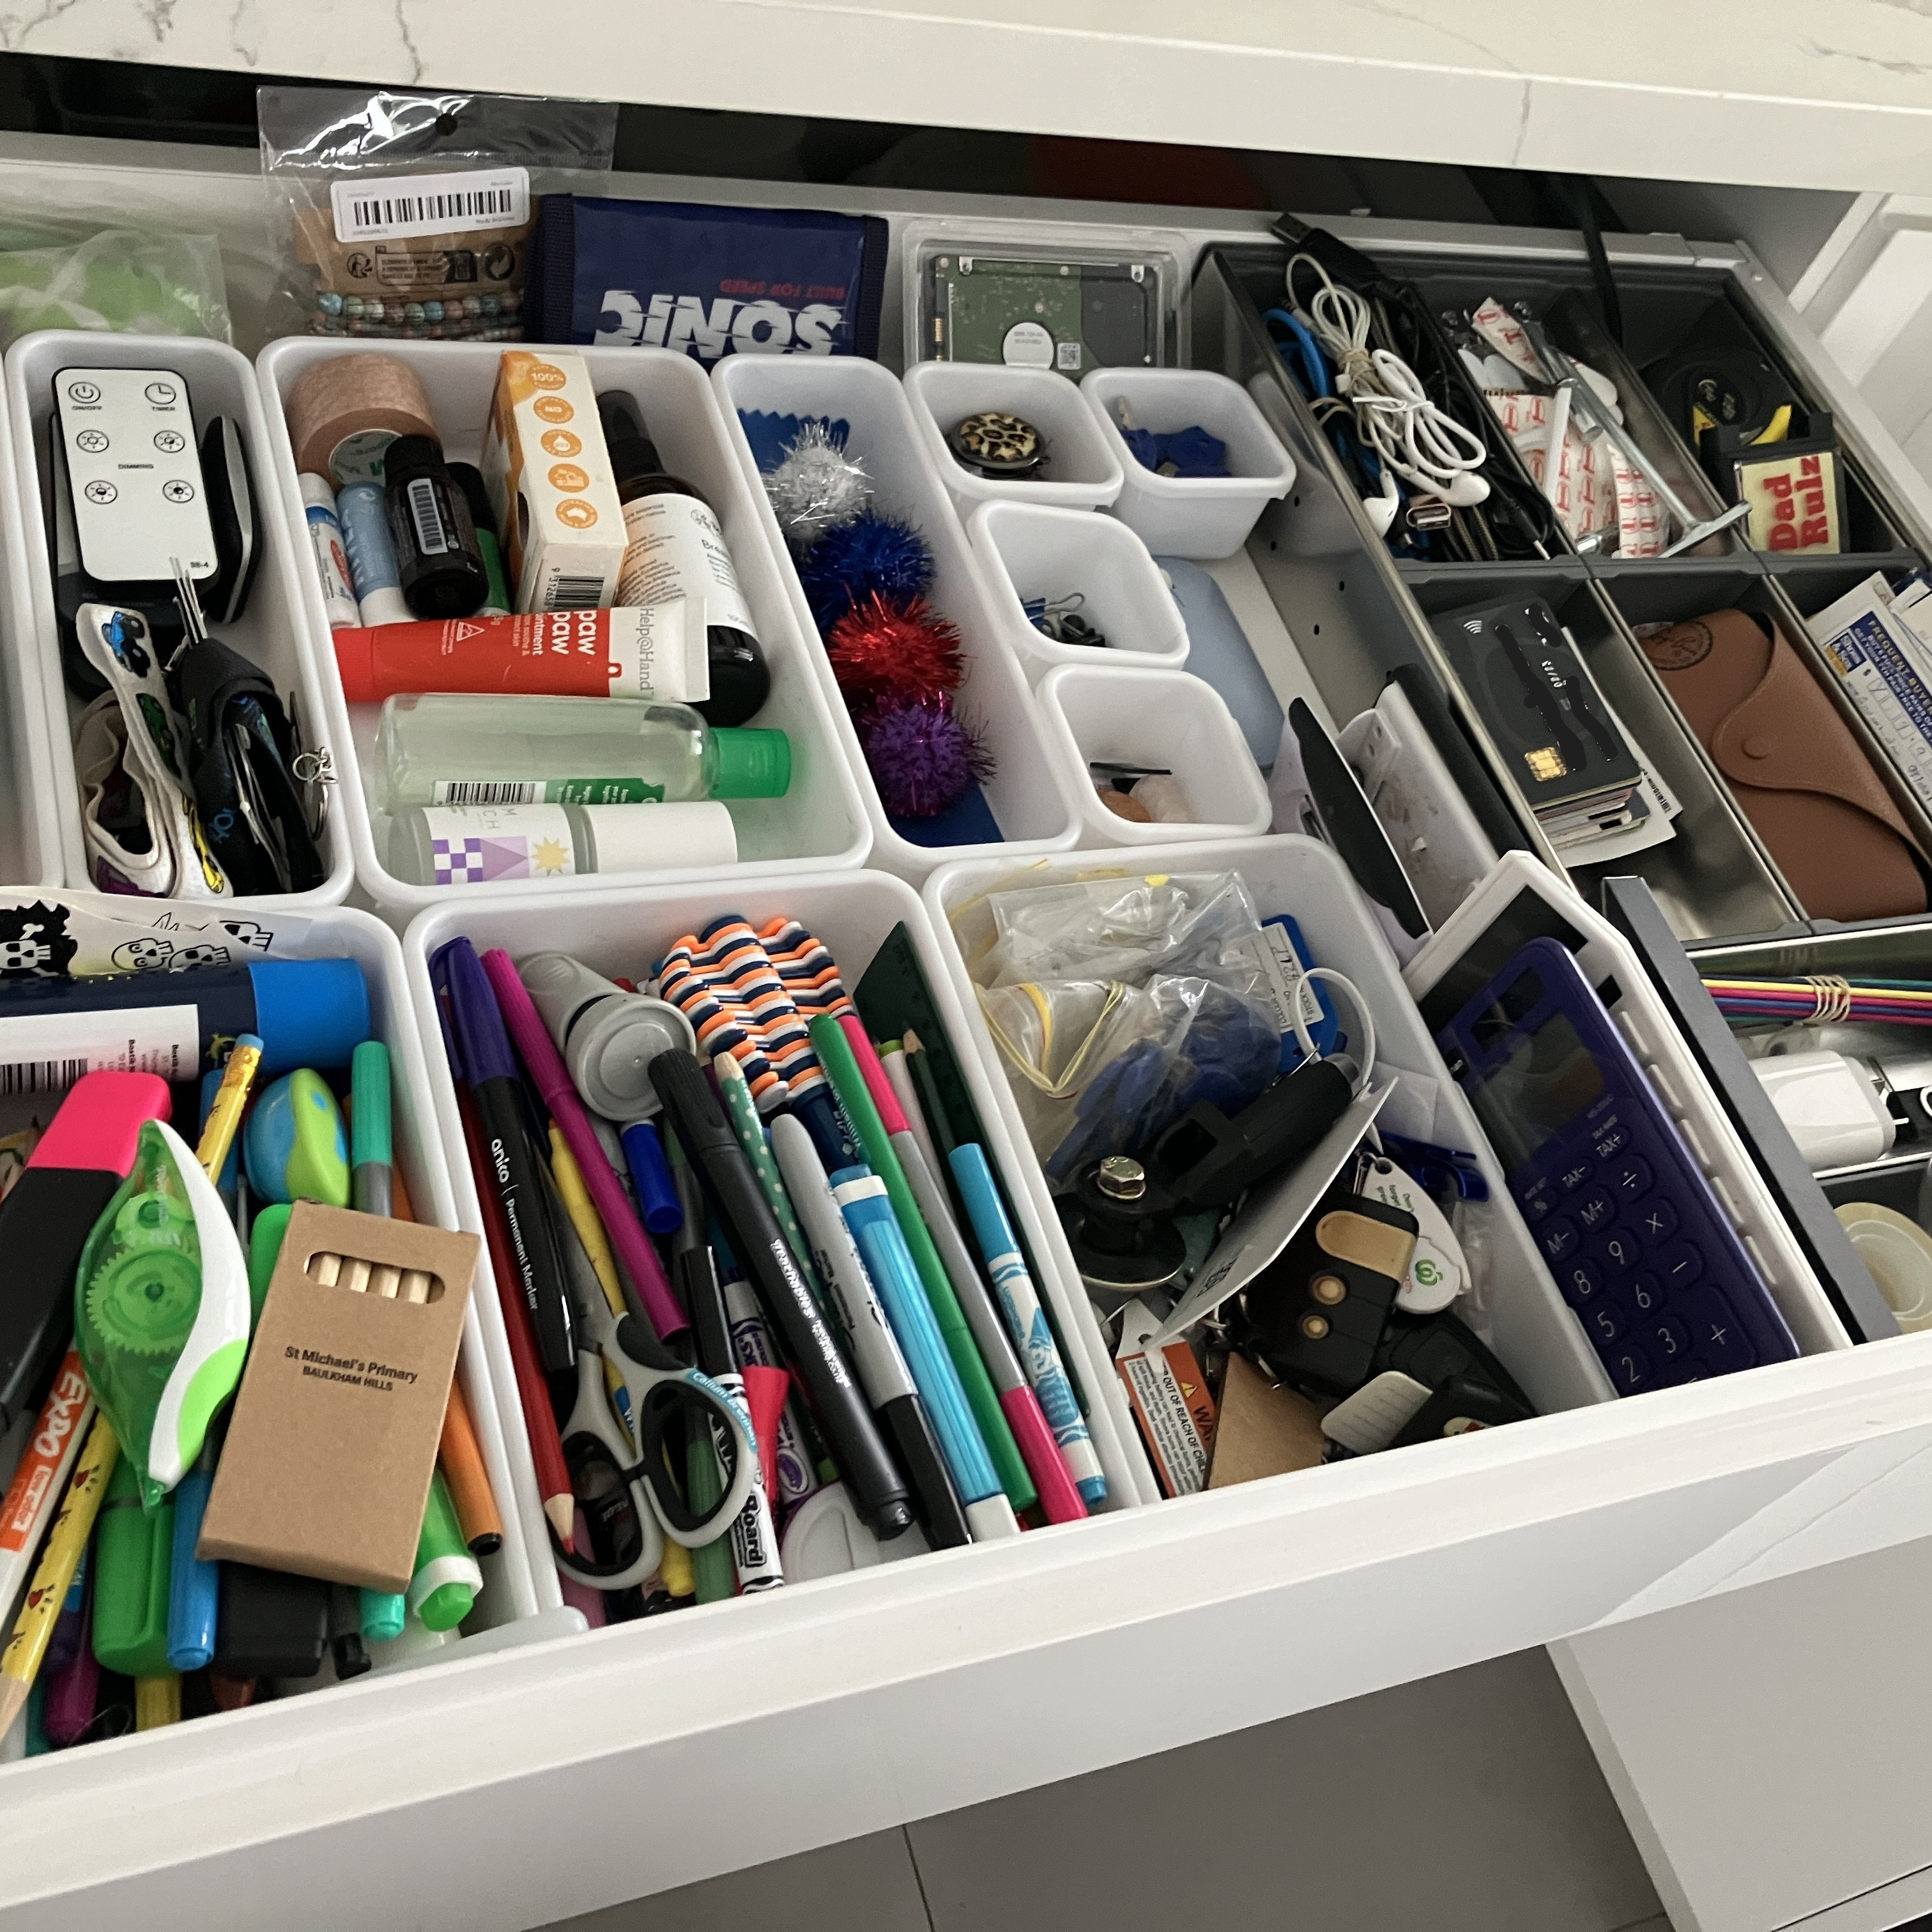 Decluttered and organised kitchen drawer